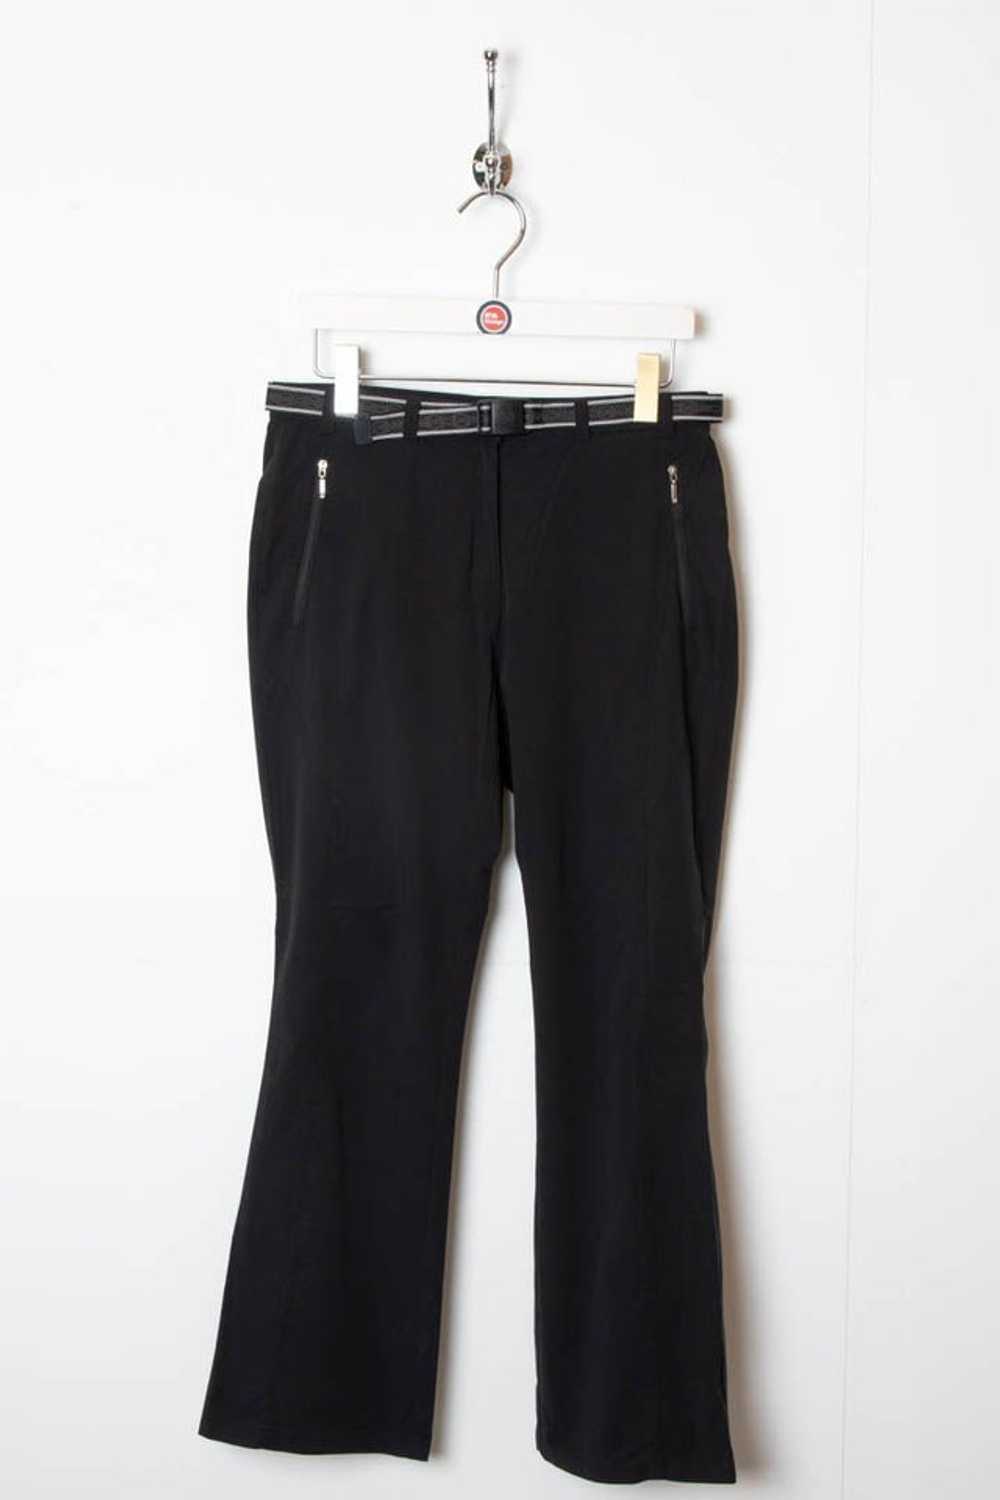 Women's Montbell Pants (M) - image 1